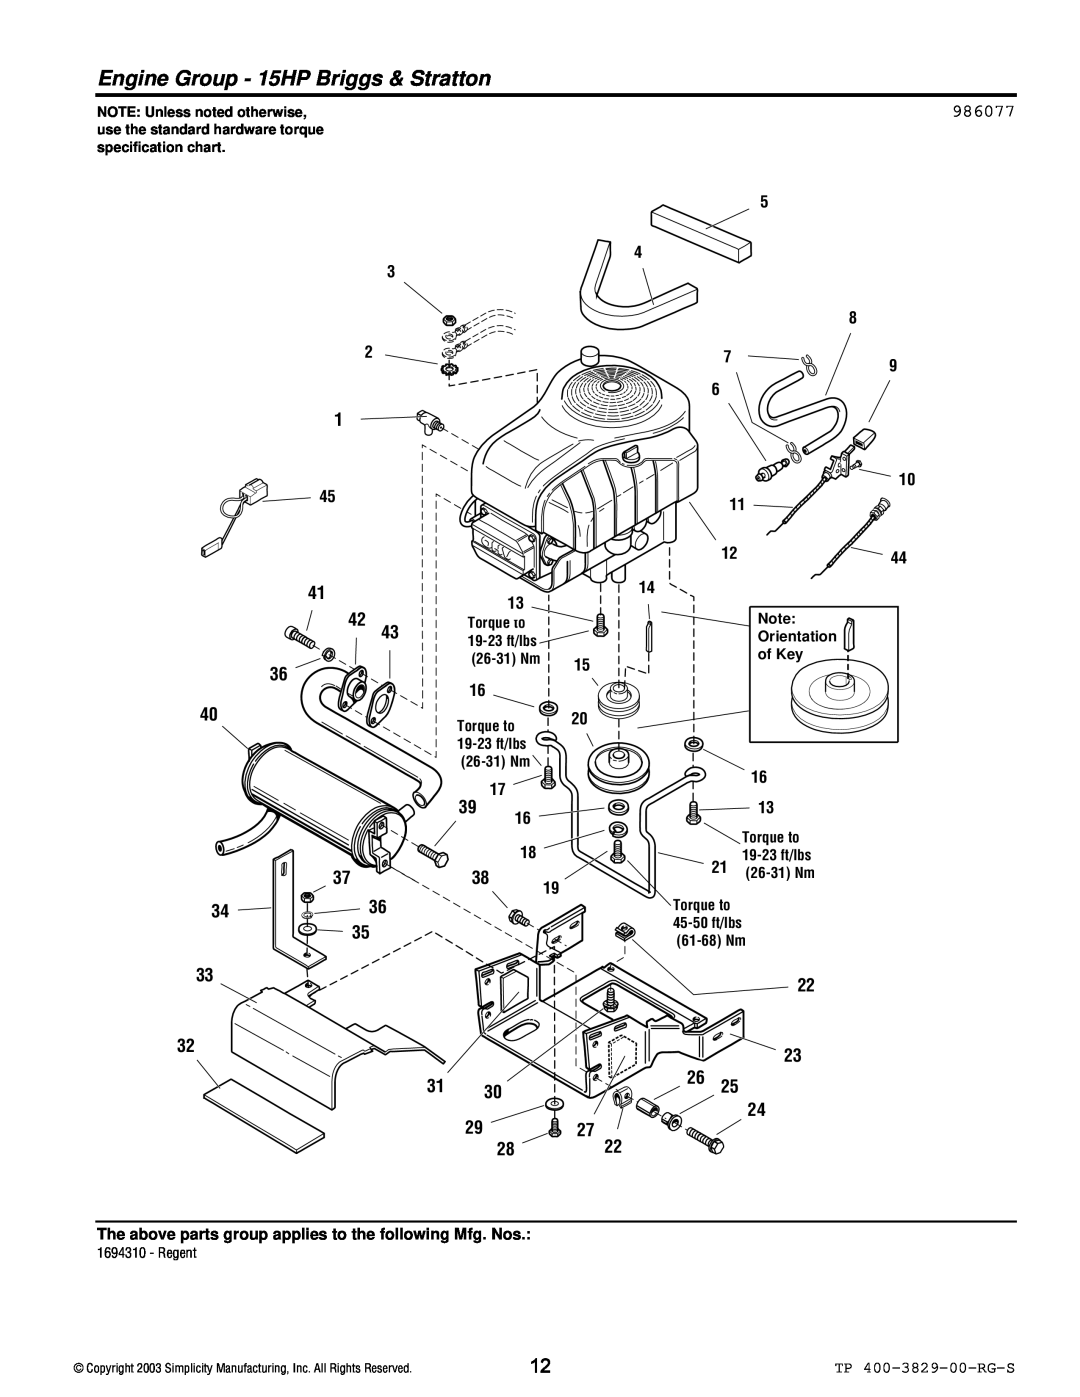 Simplicity 1694310 Engine Group - 15HP Briggs & Stratton, 986077, TP 400-3829-00-RG-S, NOTE Unless noted otherwise, of Key 